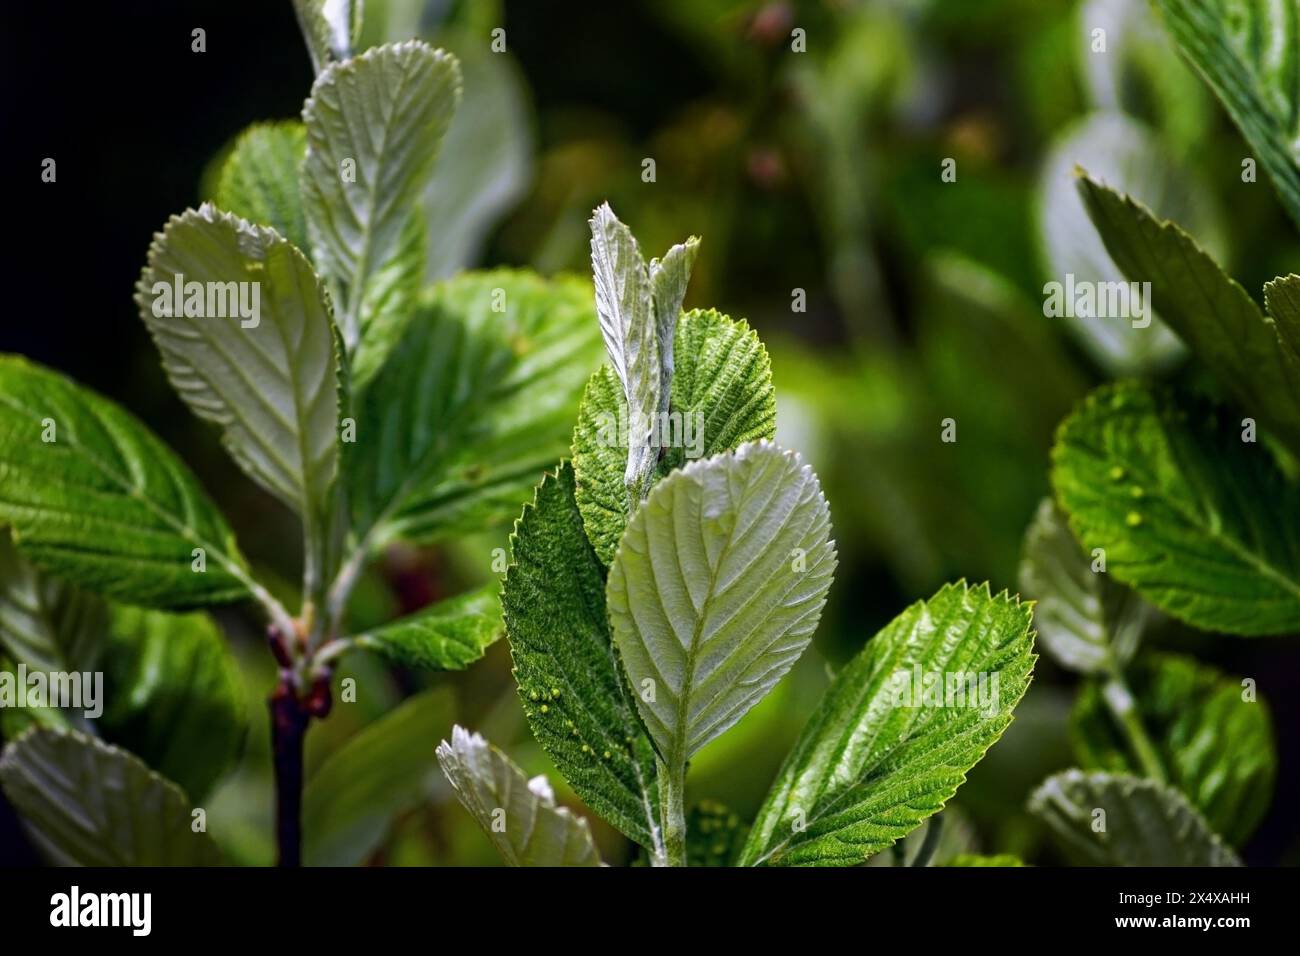 Rock whitebeam in spring - branches with young tree leaves close-up. Stock Photo